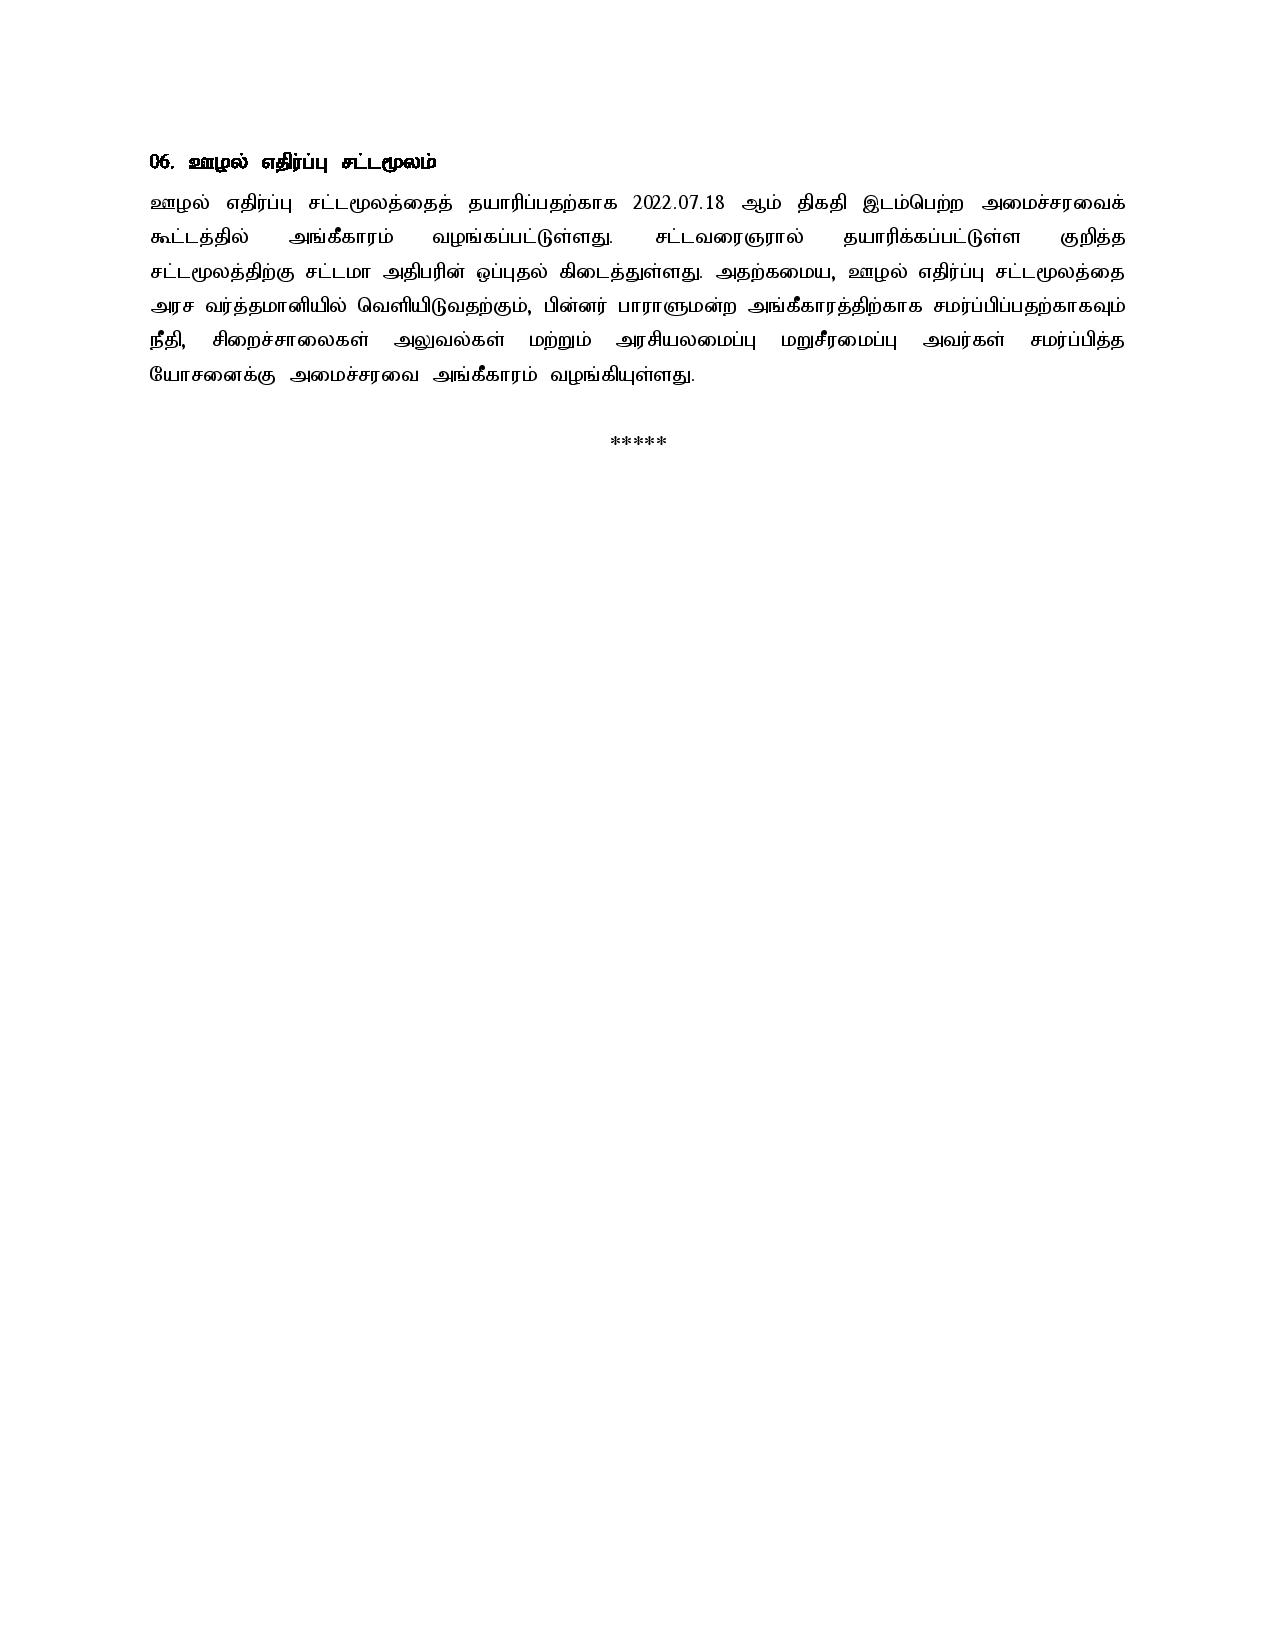 Cabinet Decisions on 13.03.2023 Tamil page 003 1